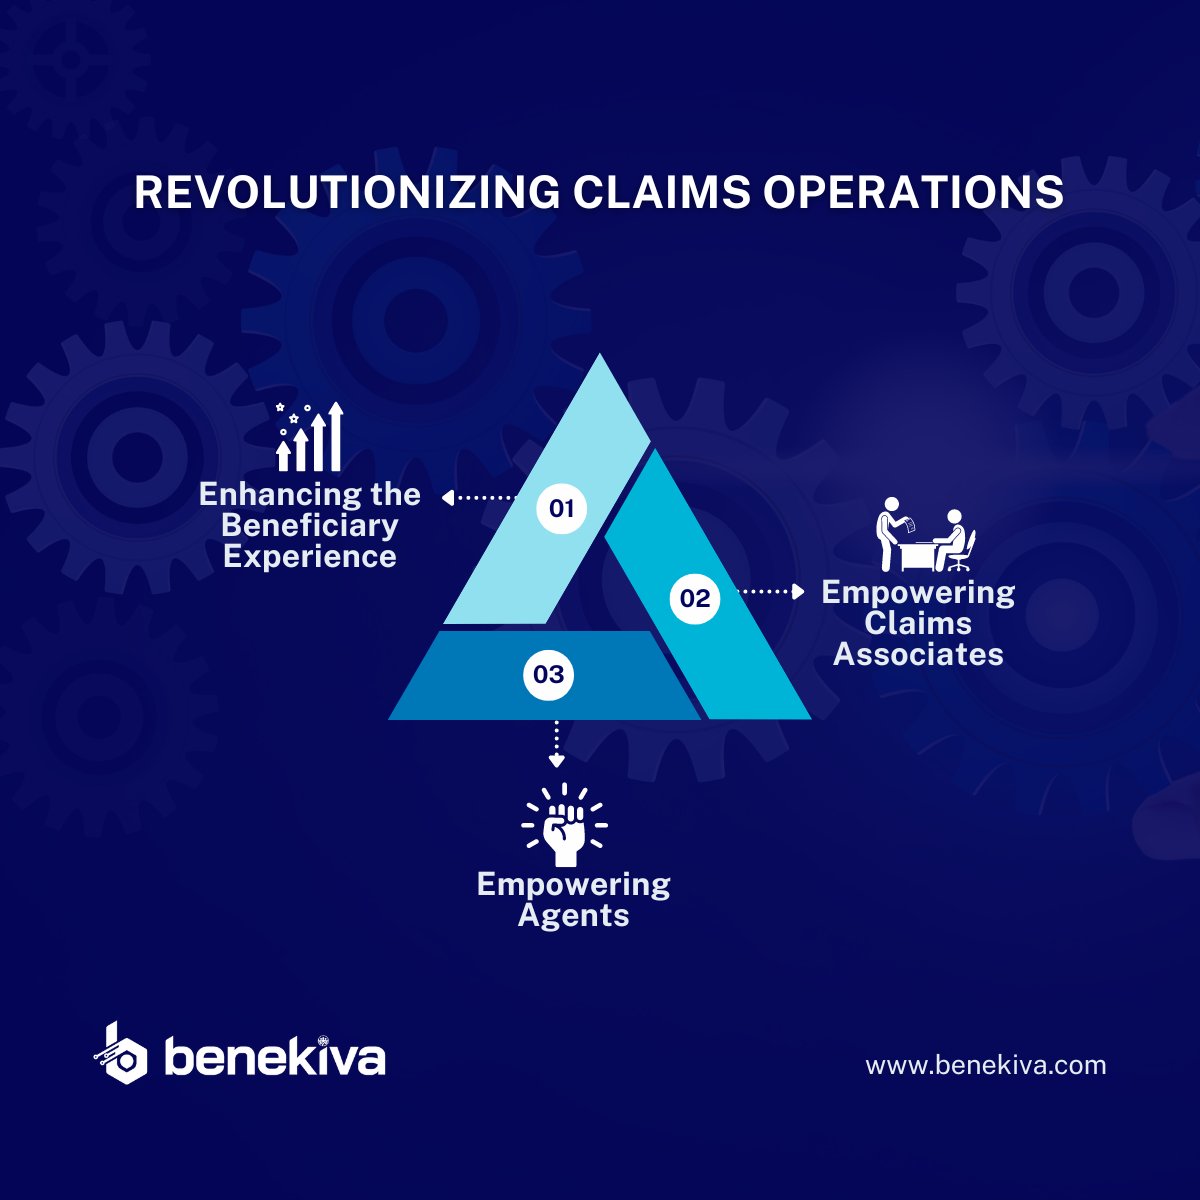 Our latest innovation is reshaping the insurance landscape.

Download your FREE WhitePaper 📄:- hubs.ly/Q02t6K_T0

Get more information at ➡️: hubs.ly/Q02t6Kdy0

#claims #insurtech #claimstech #claimmanagement #claimsautomation #optimizeclaims #futureofinsurance